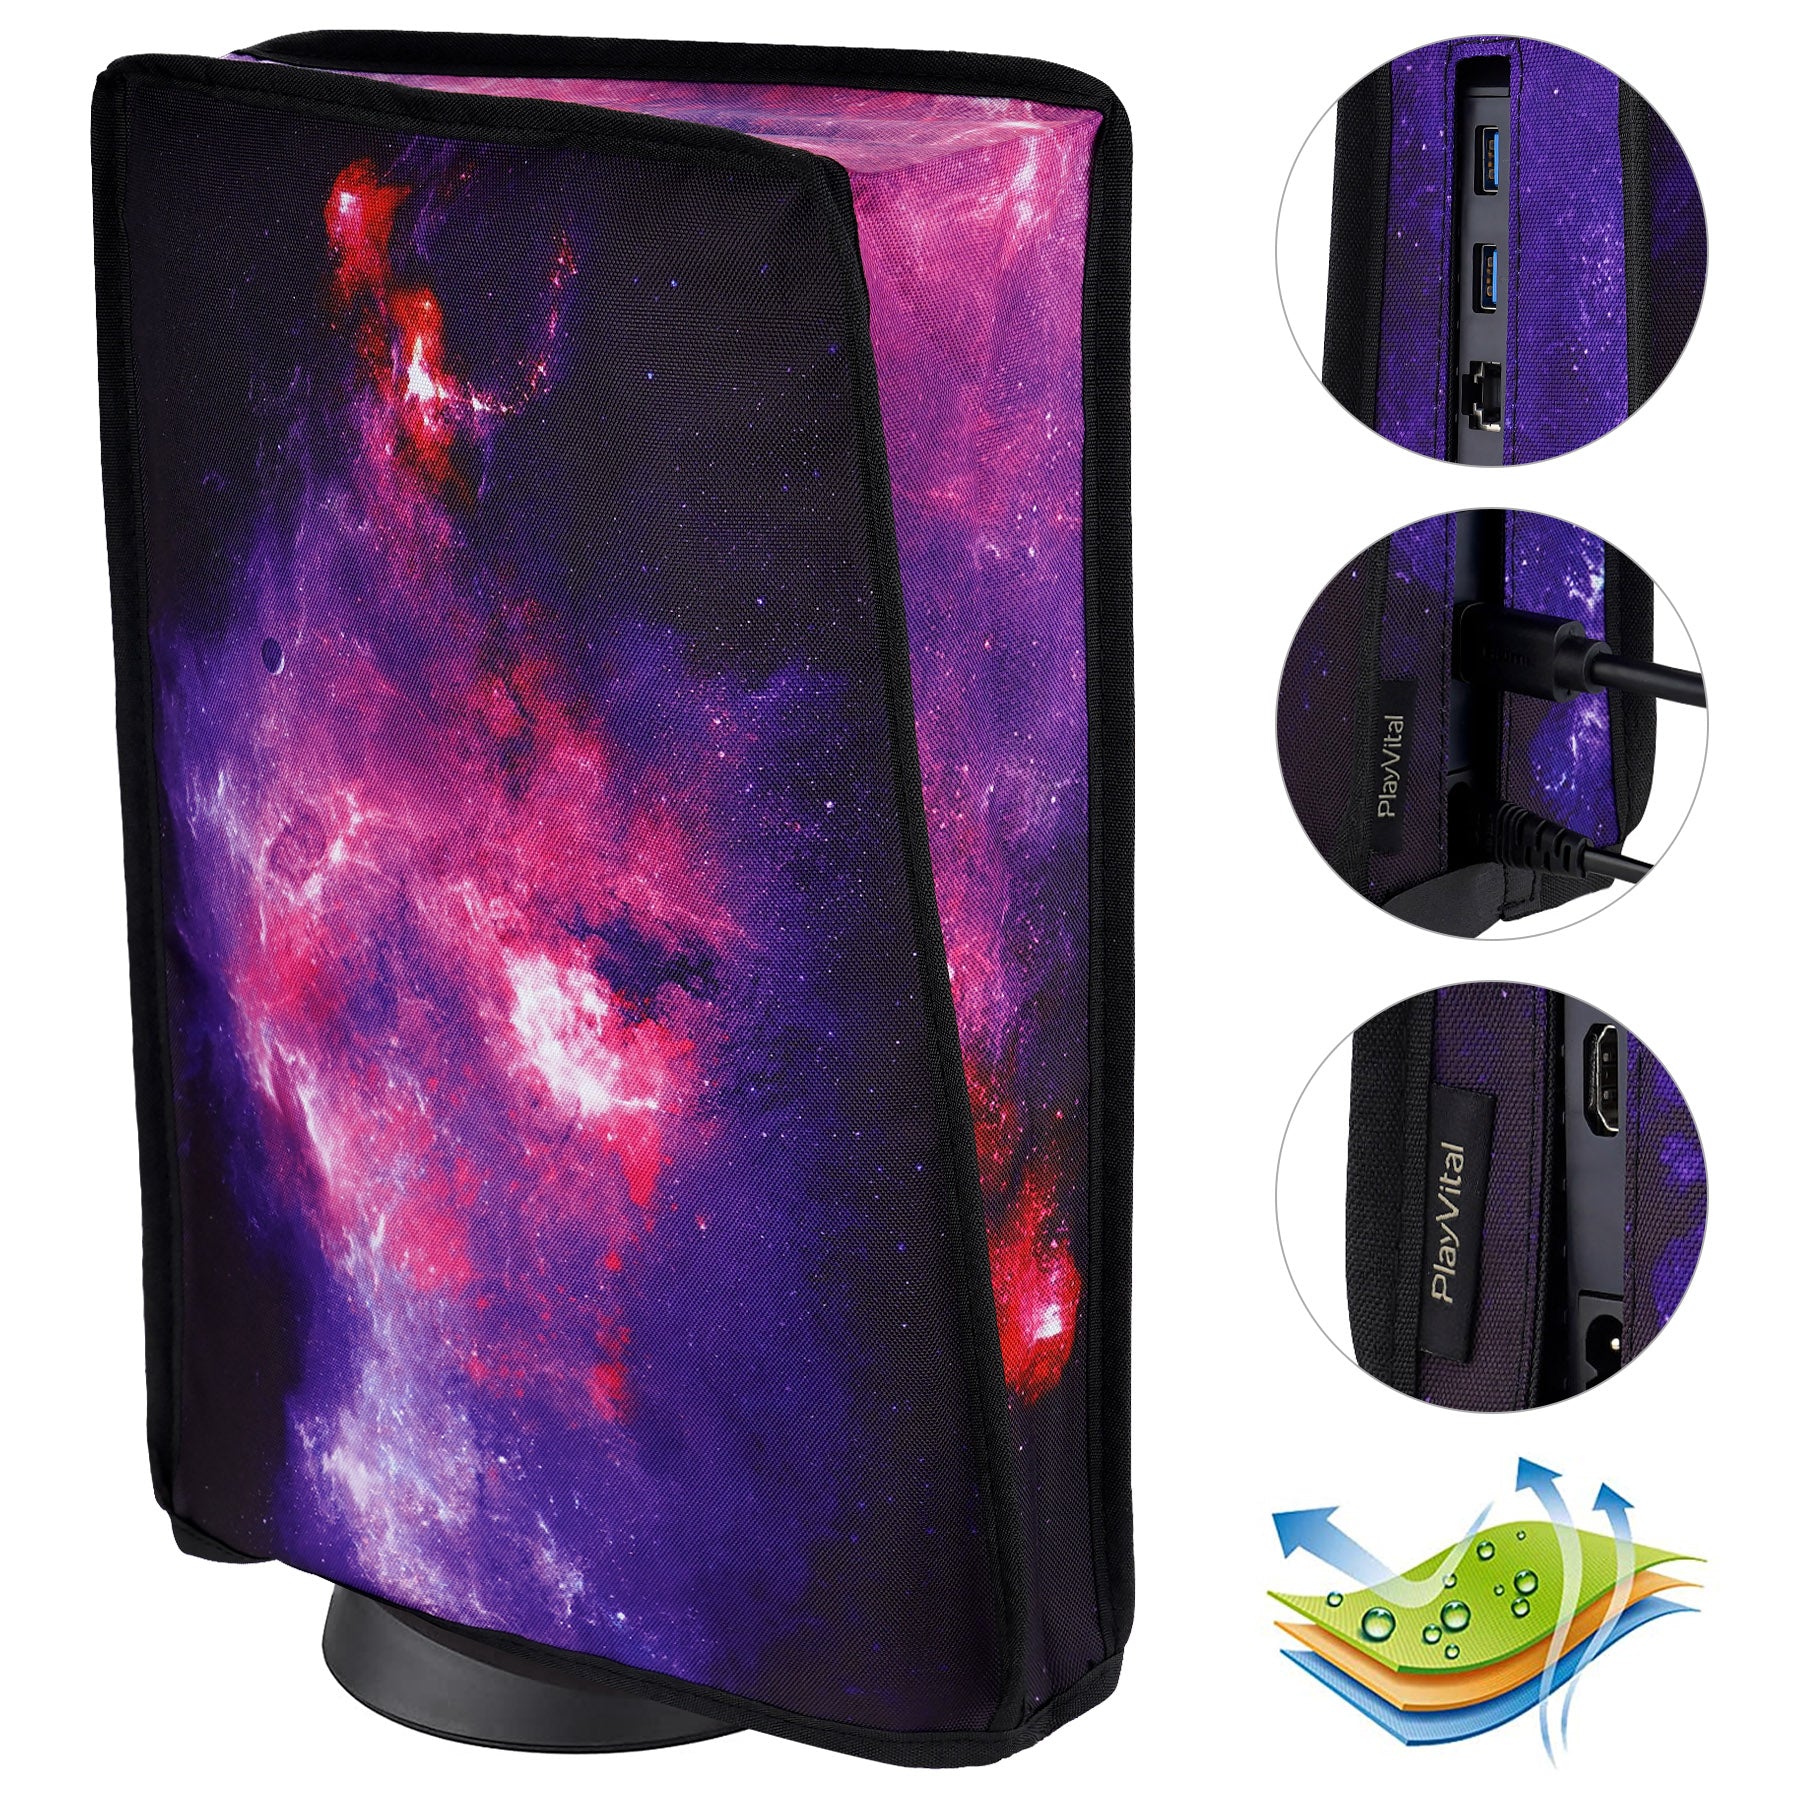 PlayVital Nebula Galaxy Anti Scratch Waterproof Dust Cover for ps5 Con –  playvital